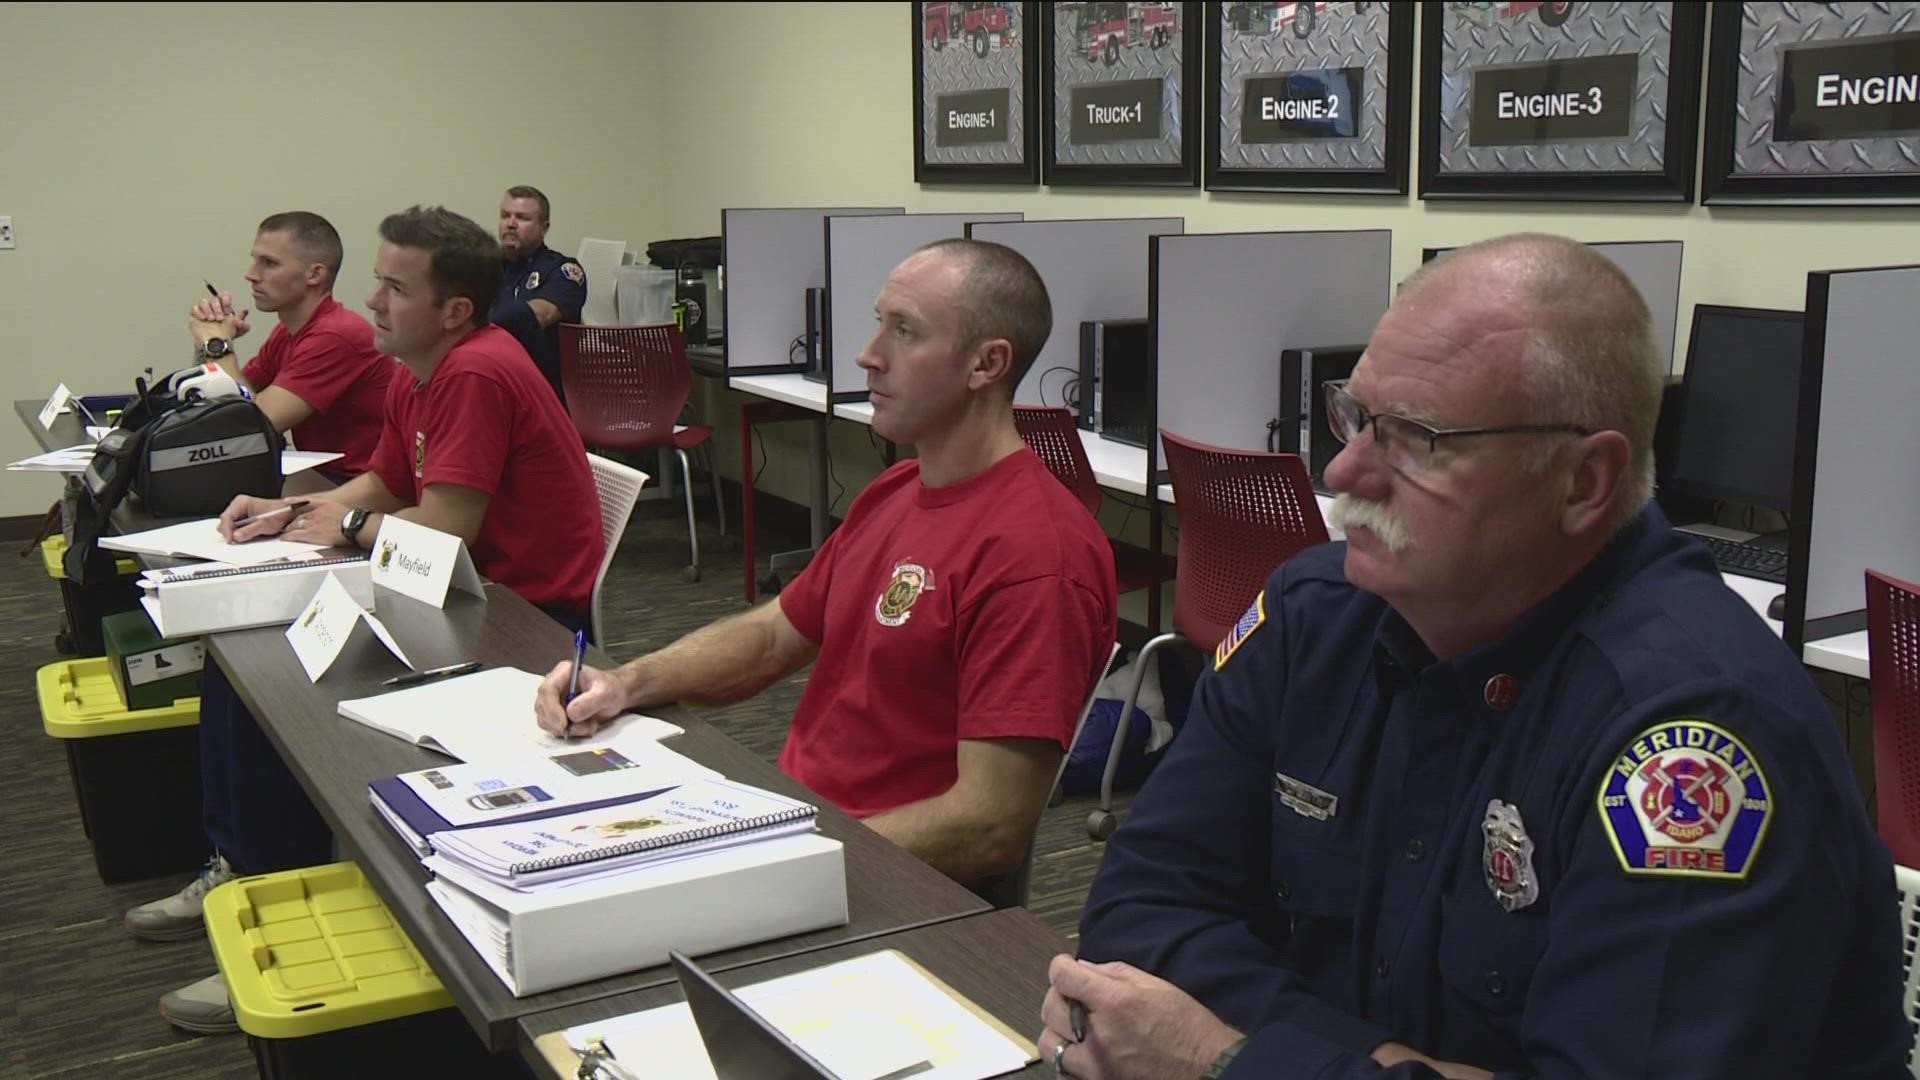 The Meridian Fire Department plans to open two new stations by fall 2023 and aims to hire 30 new firefighters by keep pace with rapid growth in the area.